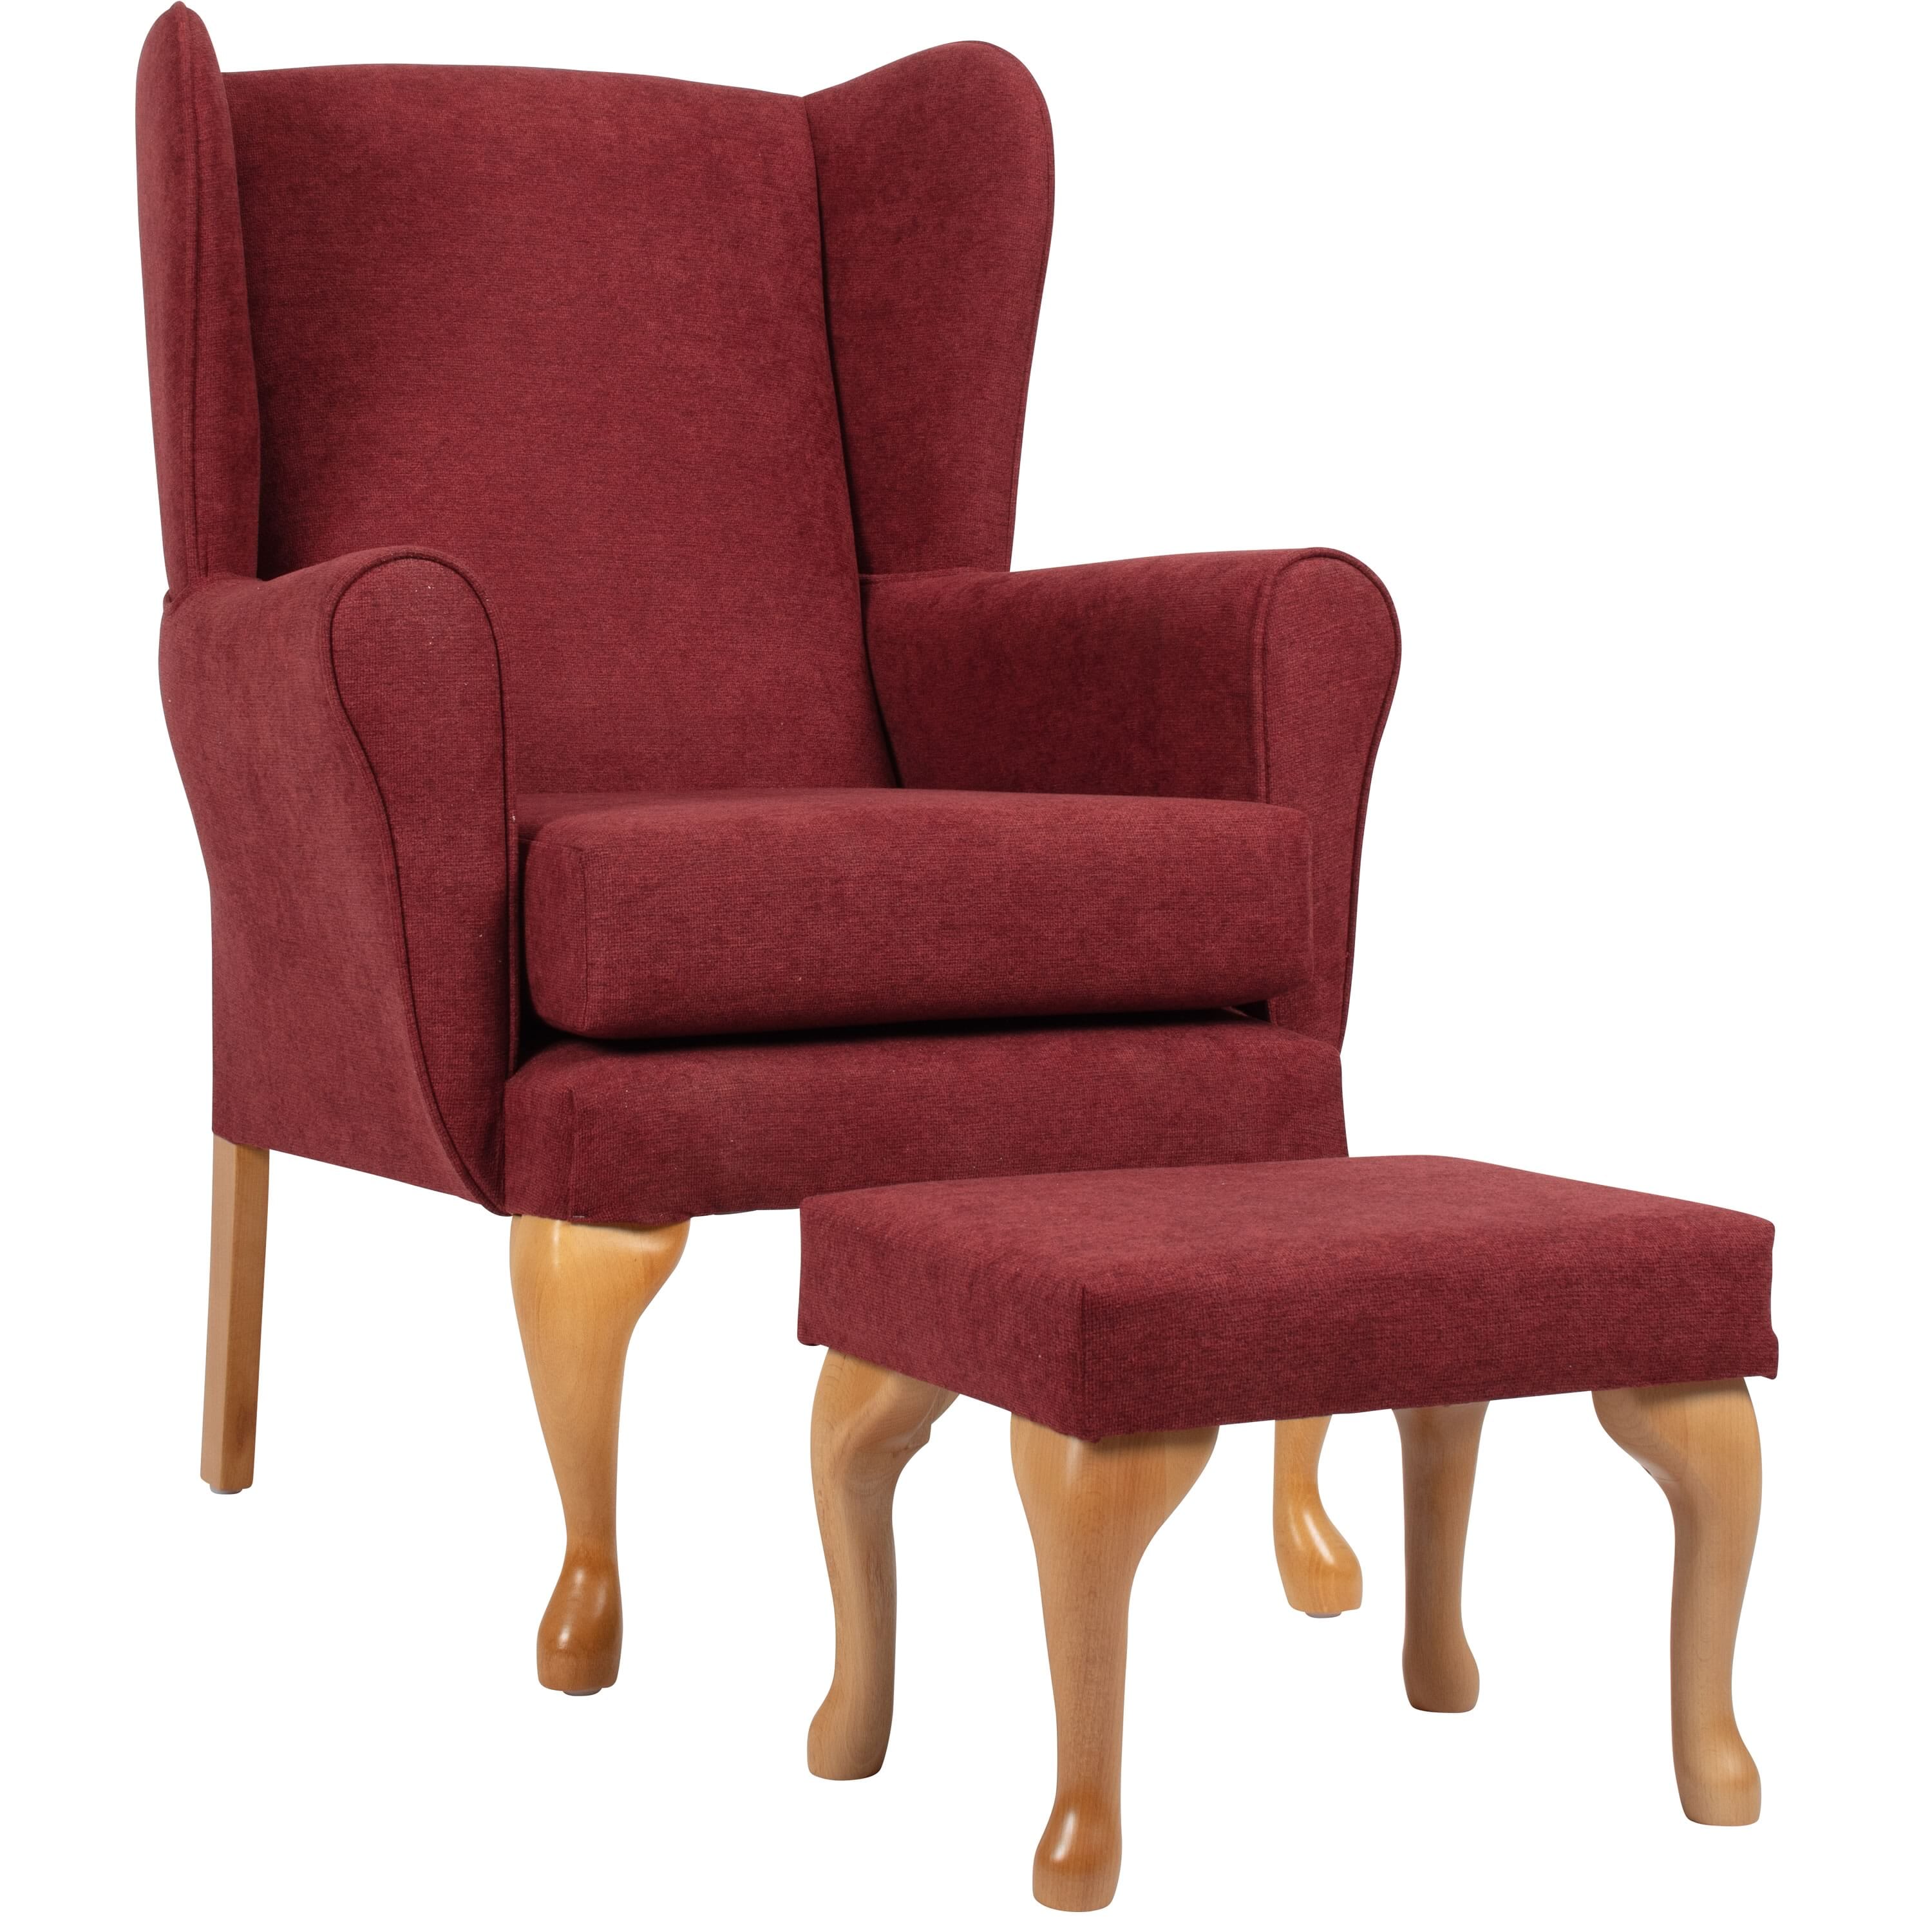 View Queen Anne Fireside Chair with Matching Footstool Deep Red information